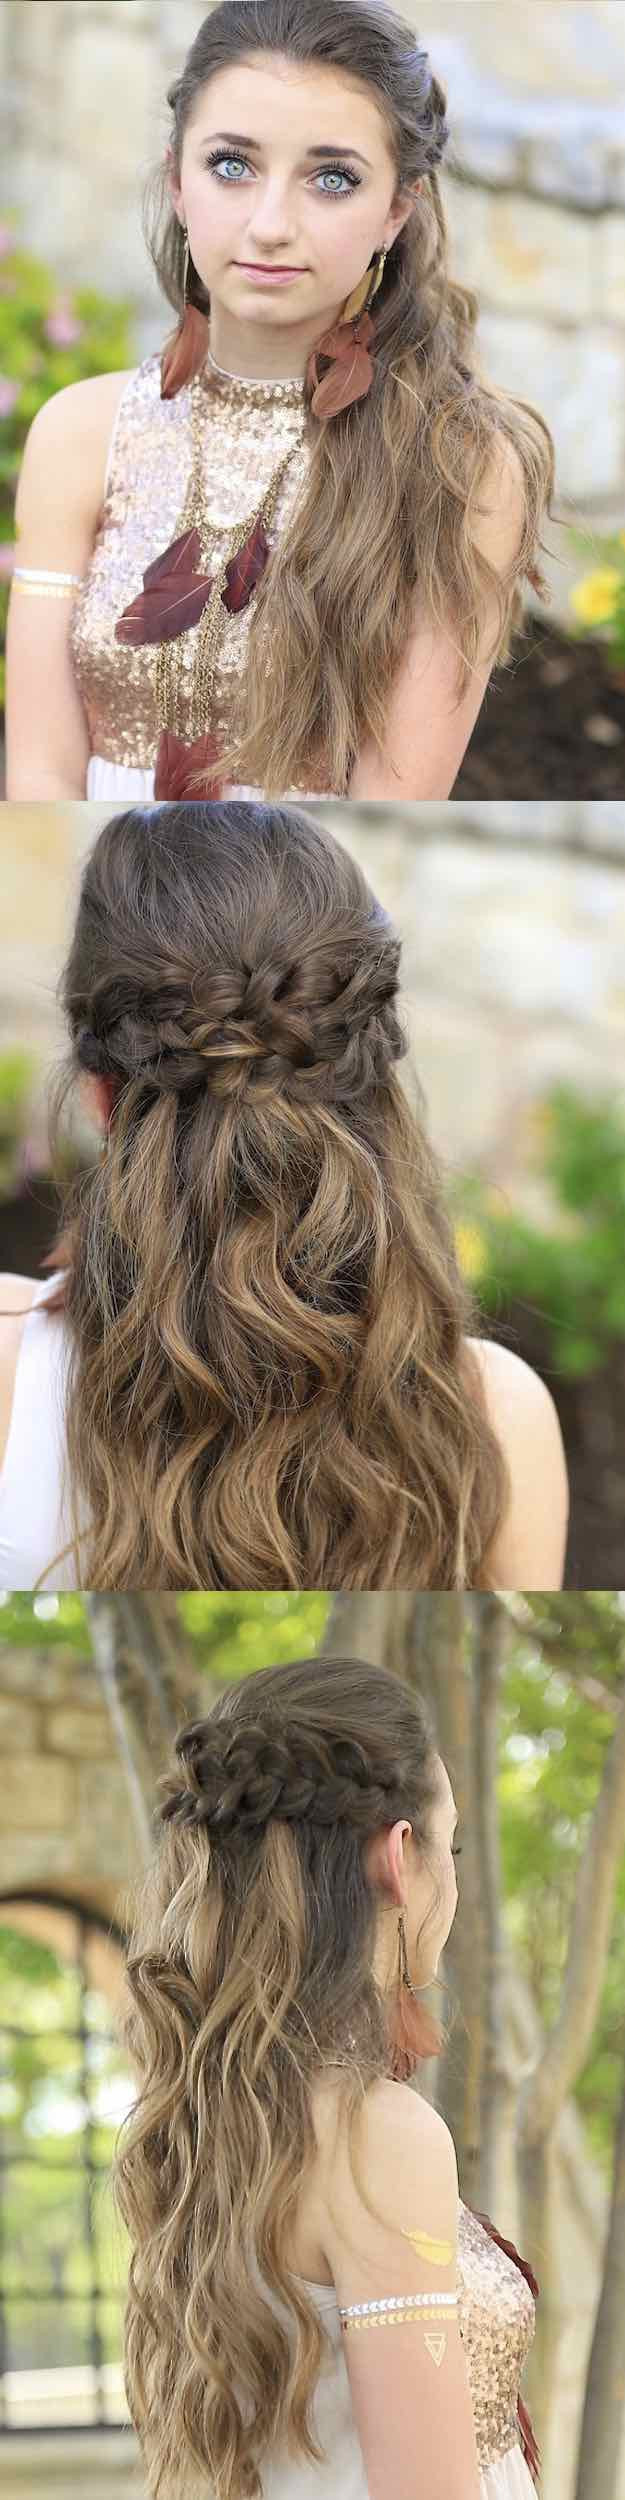 Prom Hairstyles Down Short Hair
 25 Easy Half Up Half Down Hairstyle Tutorials For Prom